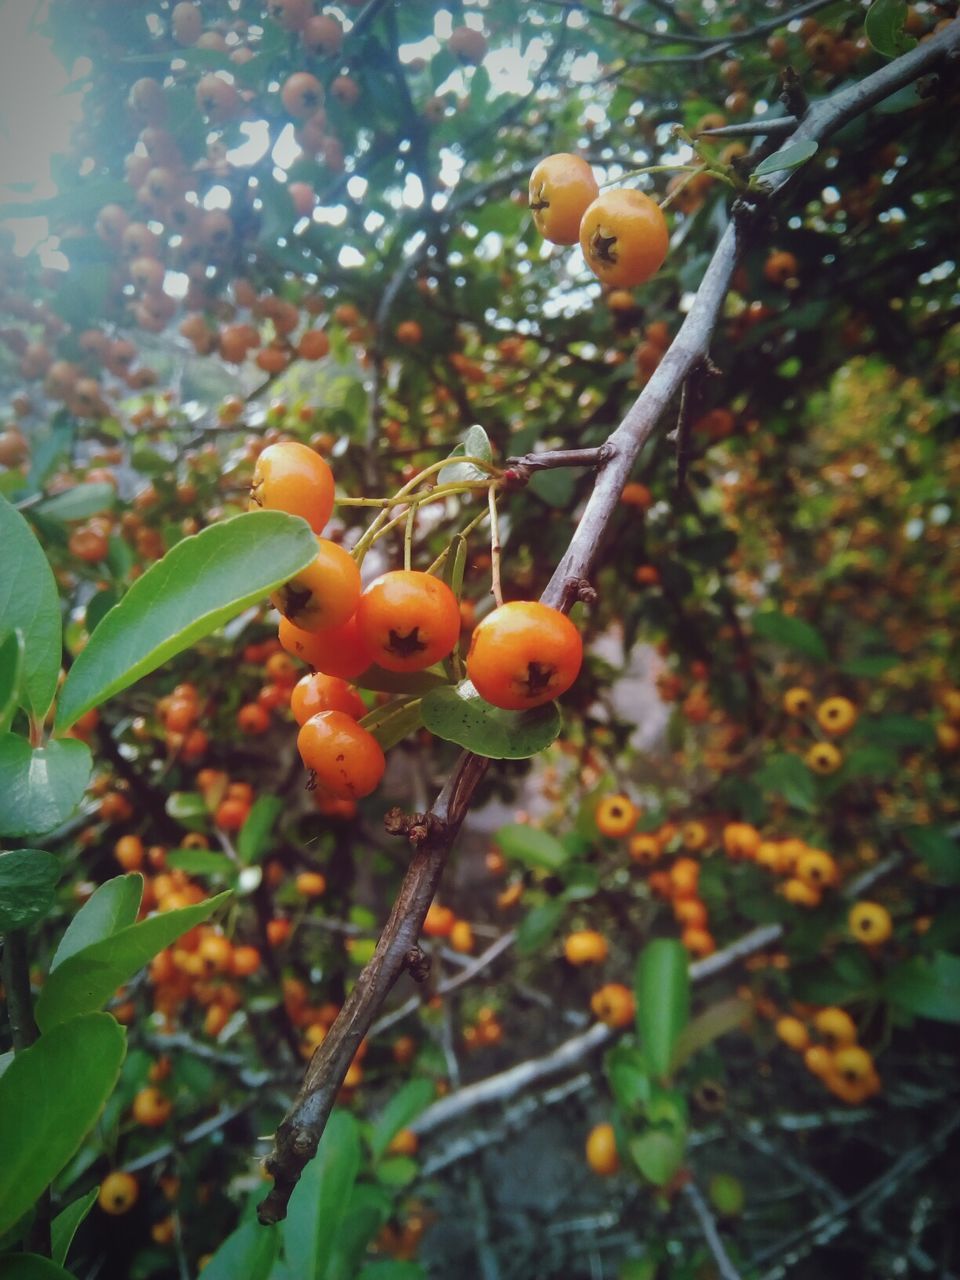 fruit, growth, food and drink, food, nature, tree, leaf, plant, growing, outdoors, day, no people, freshness, focus on foreground, green color, beauty in nature, rowanberry, yellow, close-up, healthy eating